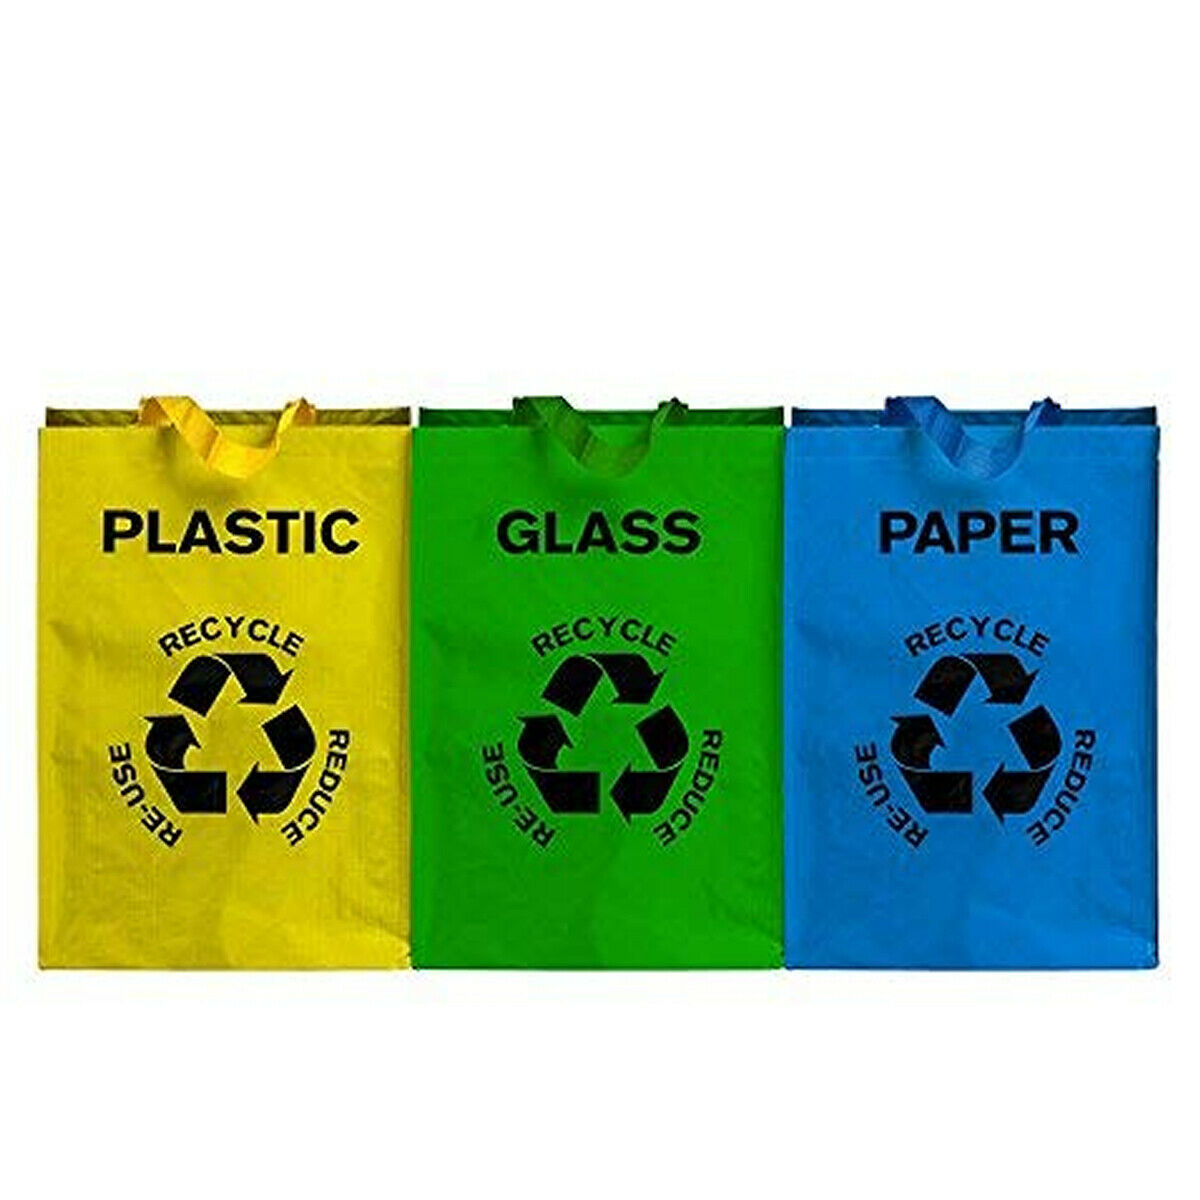 Set Of 3 Recycling Recycle Bags Colour Coded Plastic Glass Paper Storage Bin Bag